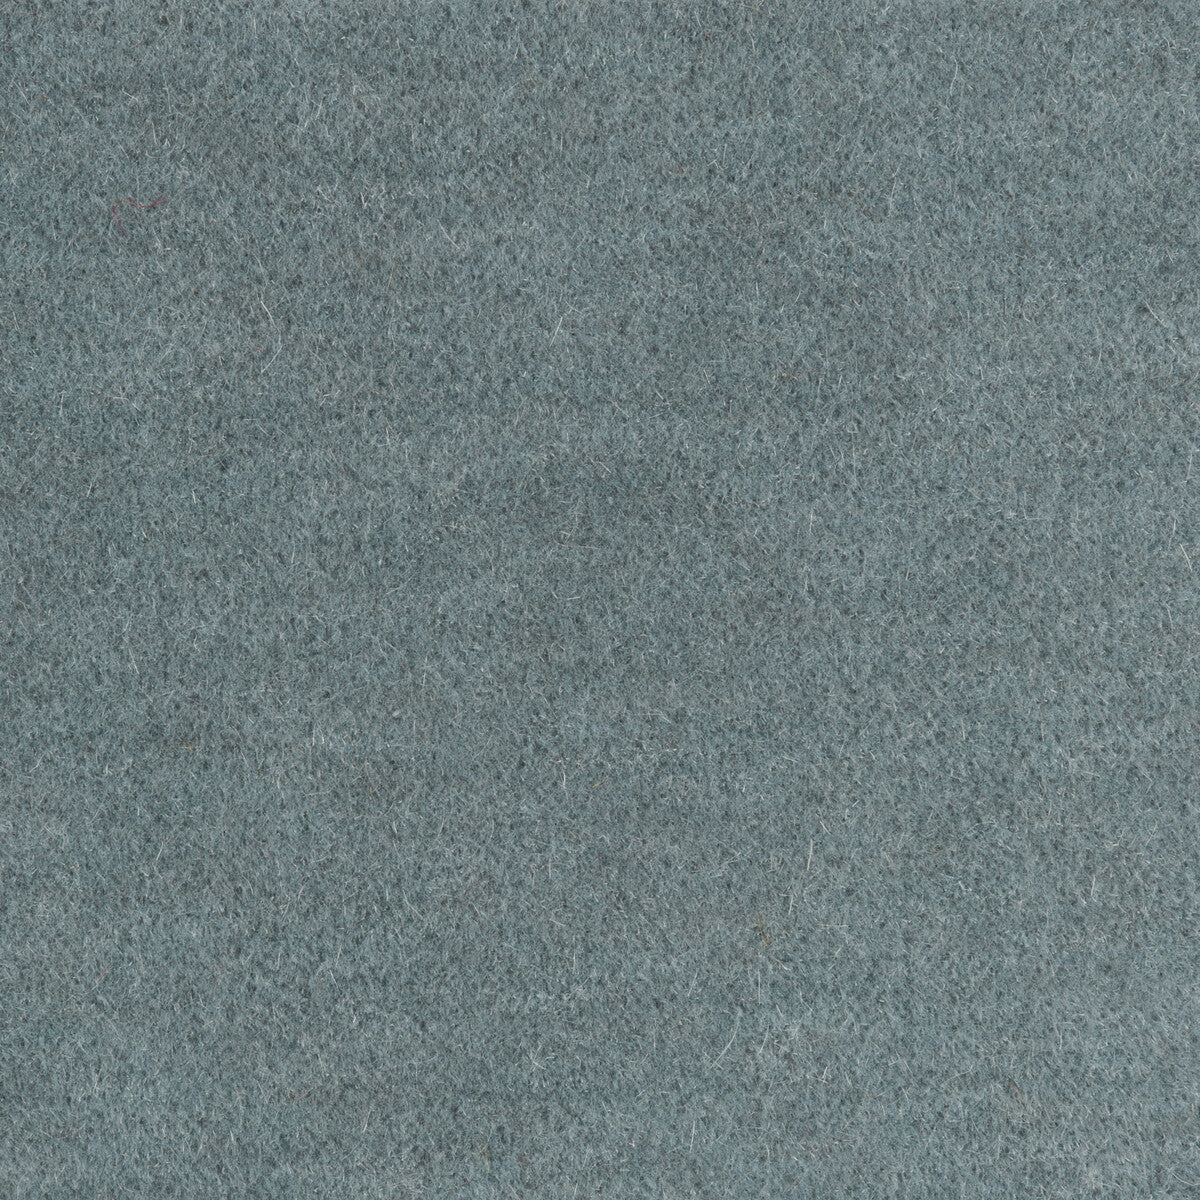 Windsor Mohair fabric in dusty blue color - pattern 34258.1515.0 - by Kravet Couture